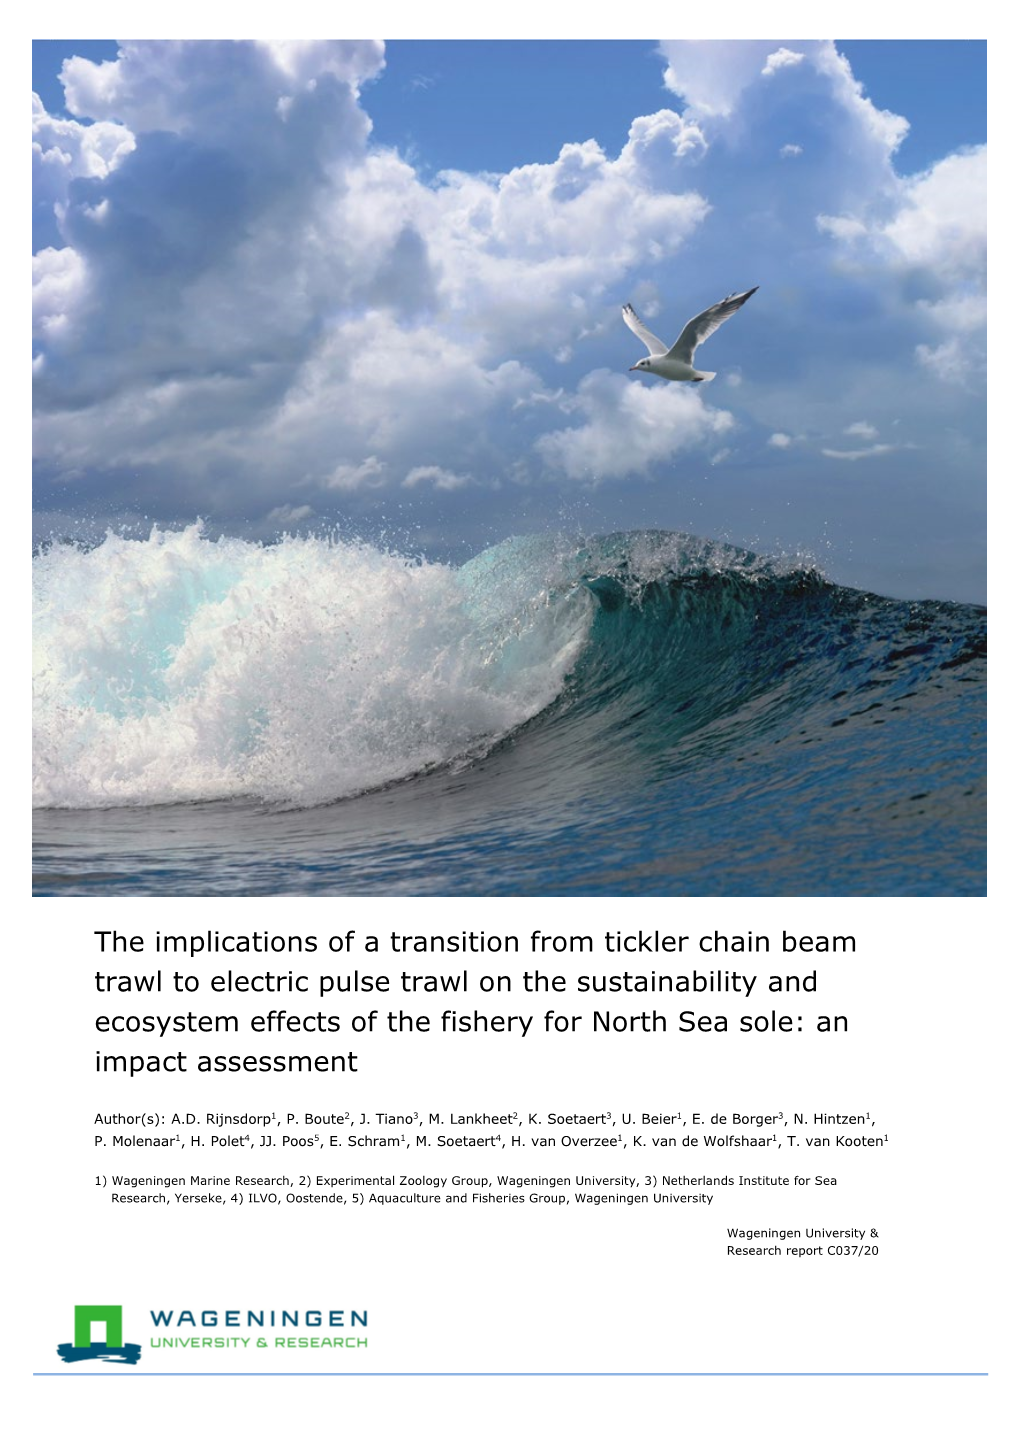 The Implications of a Transition from Tickler Chain Beam Trawl to Electric